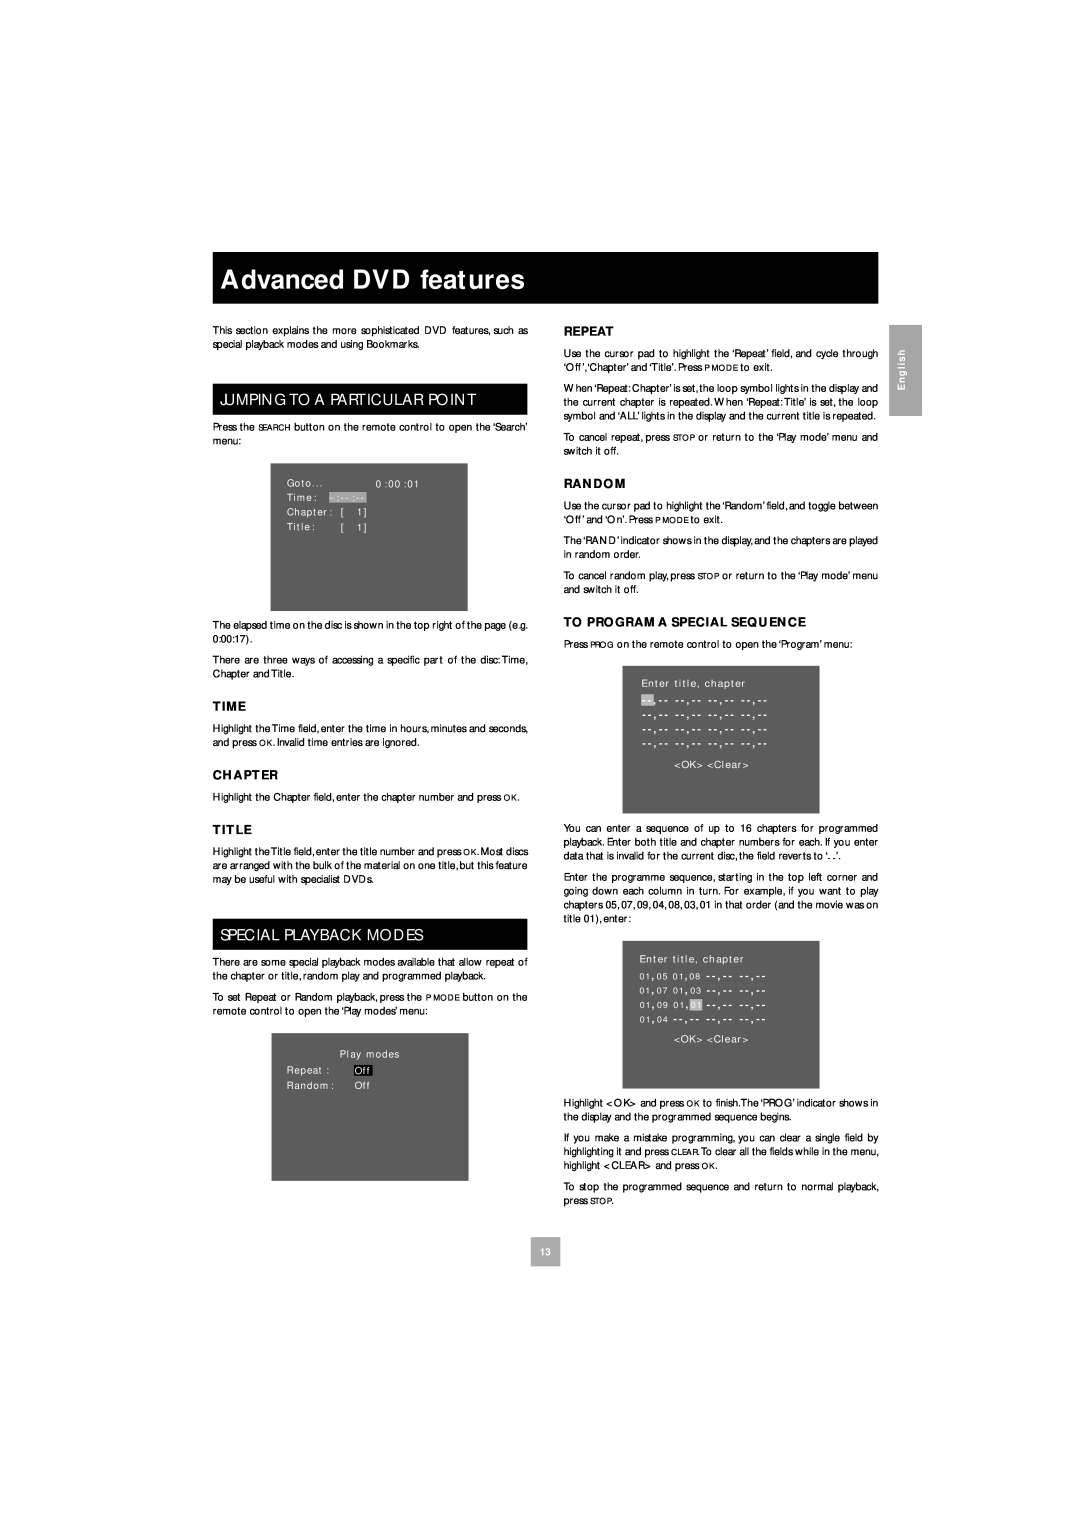 Arcam DV27 manual Advanced DVD features, Jumping To A Particular Point, Special Playback Modes 